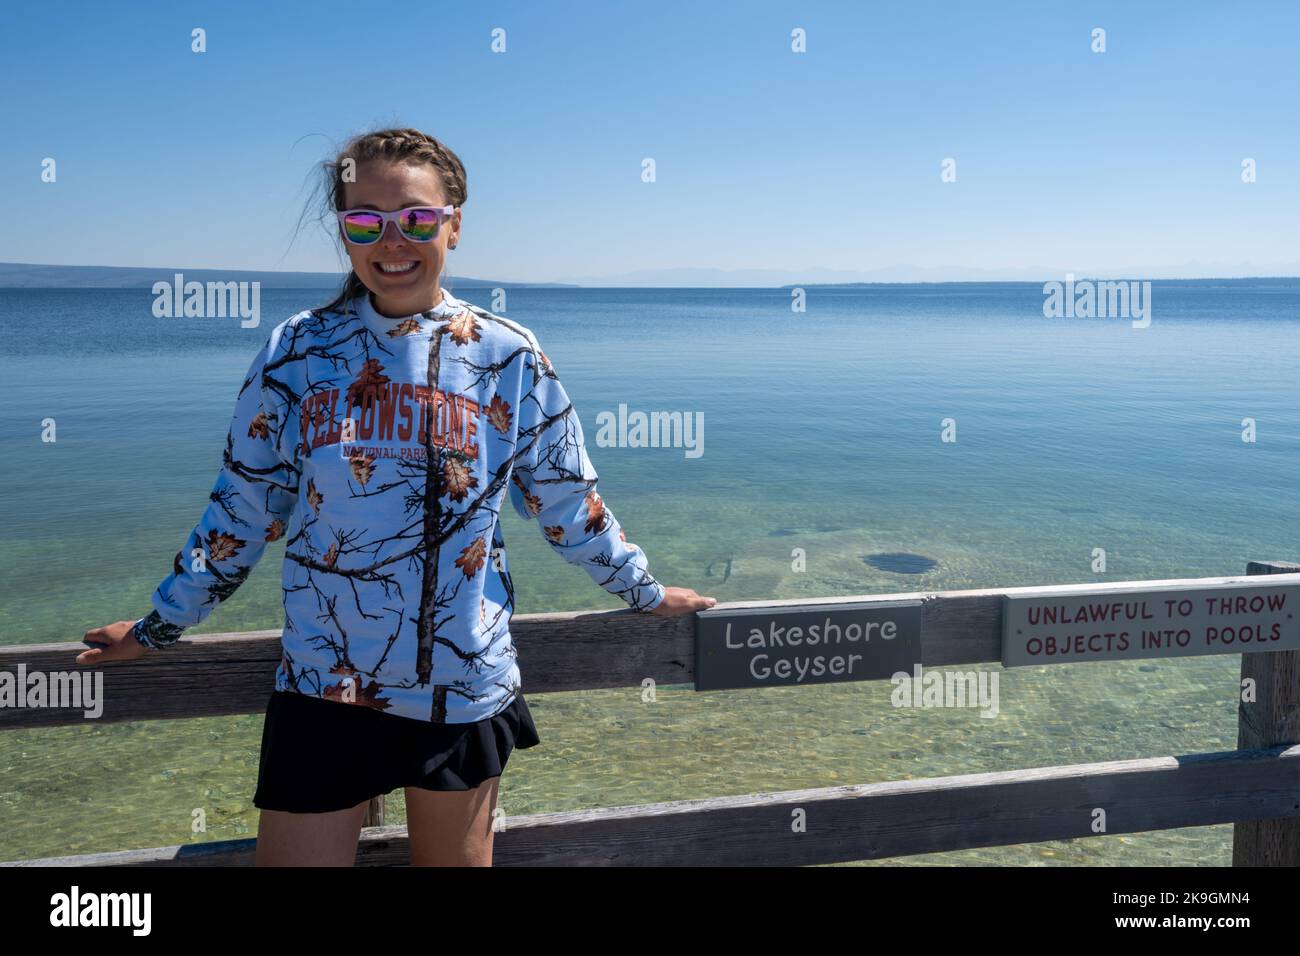 Wyoming, USA - July 19, 2022: Goofy tourist woman wearing a tacky souviner sweatshirt poses at Lakeshore Geyser in Yellowstone National Park Stock Photo